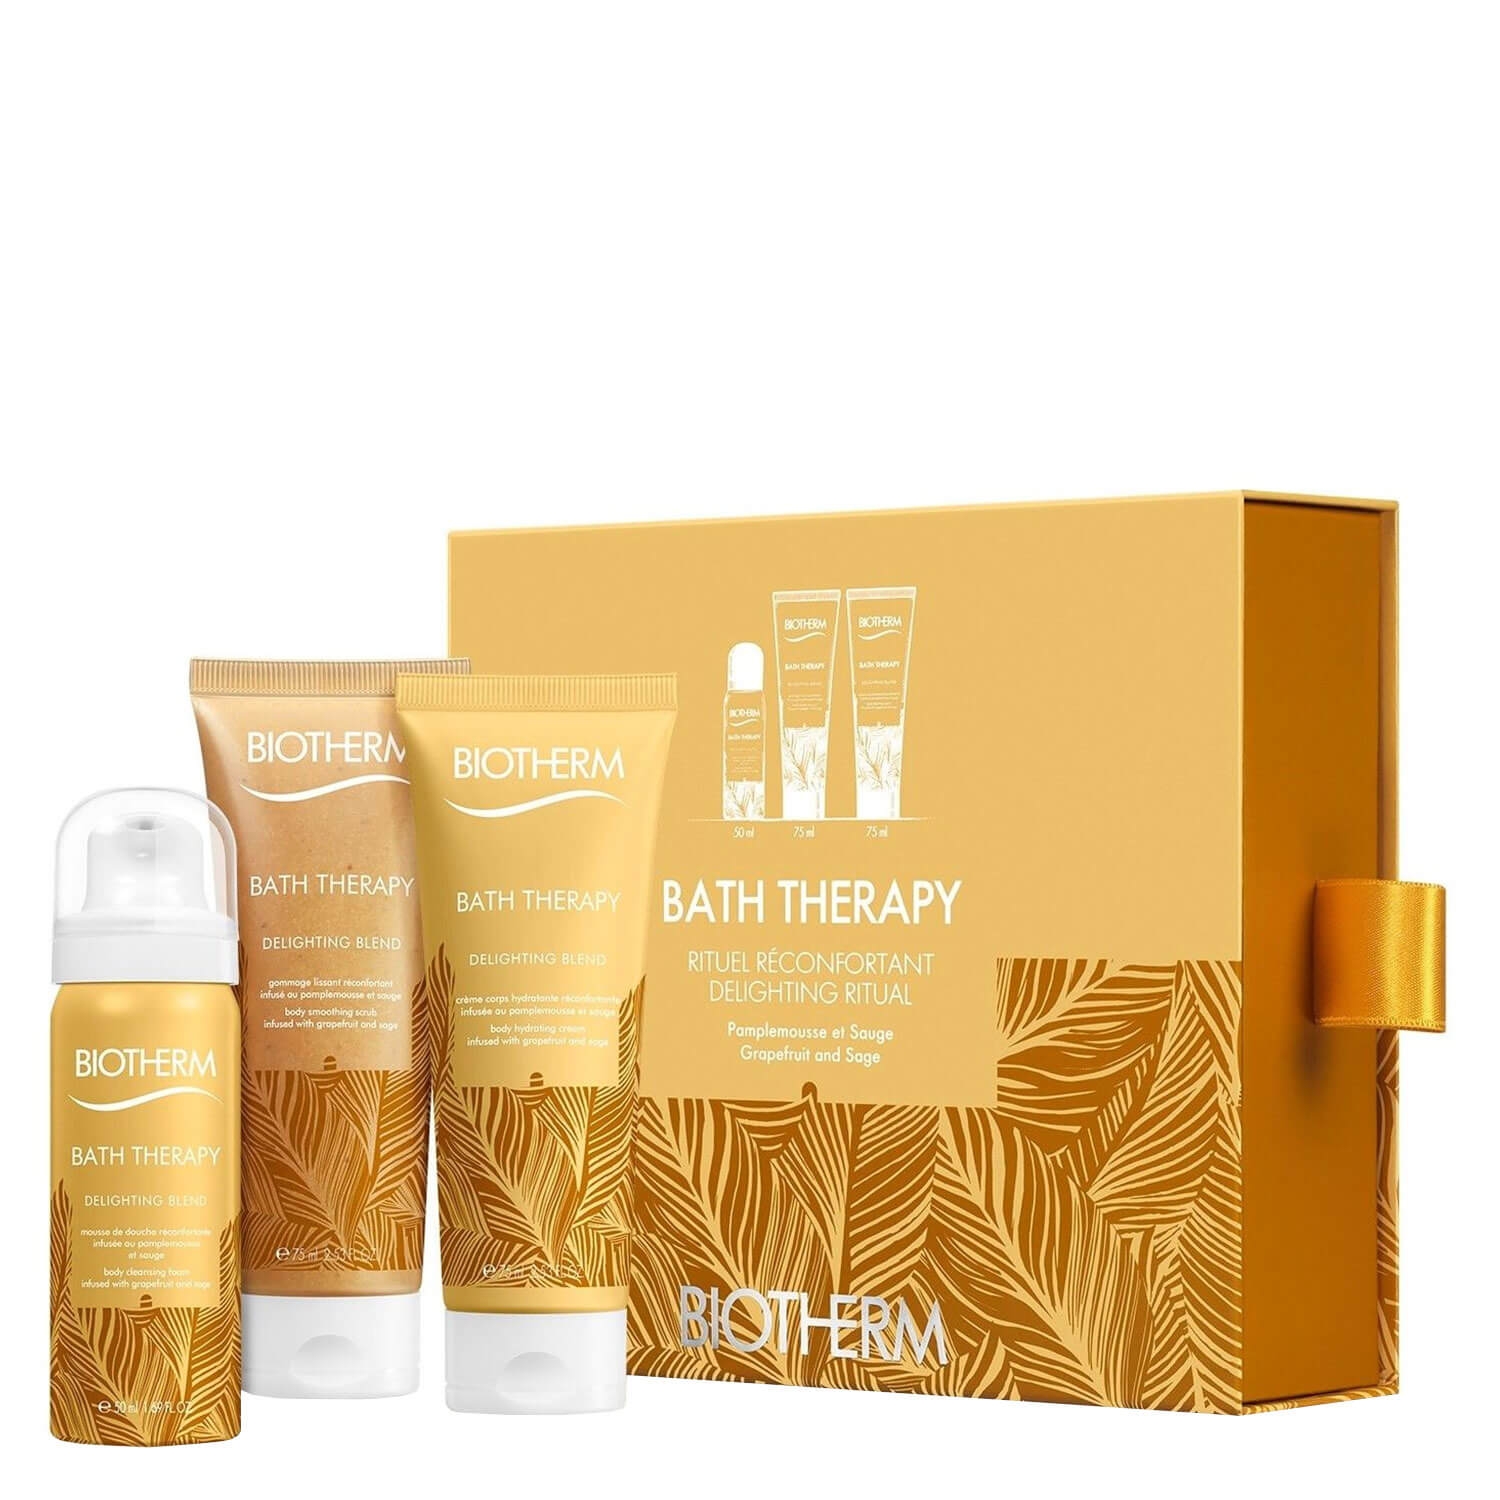 Product image from Bath Therapy - Delighting Starter Kit